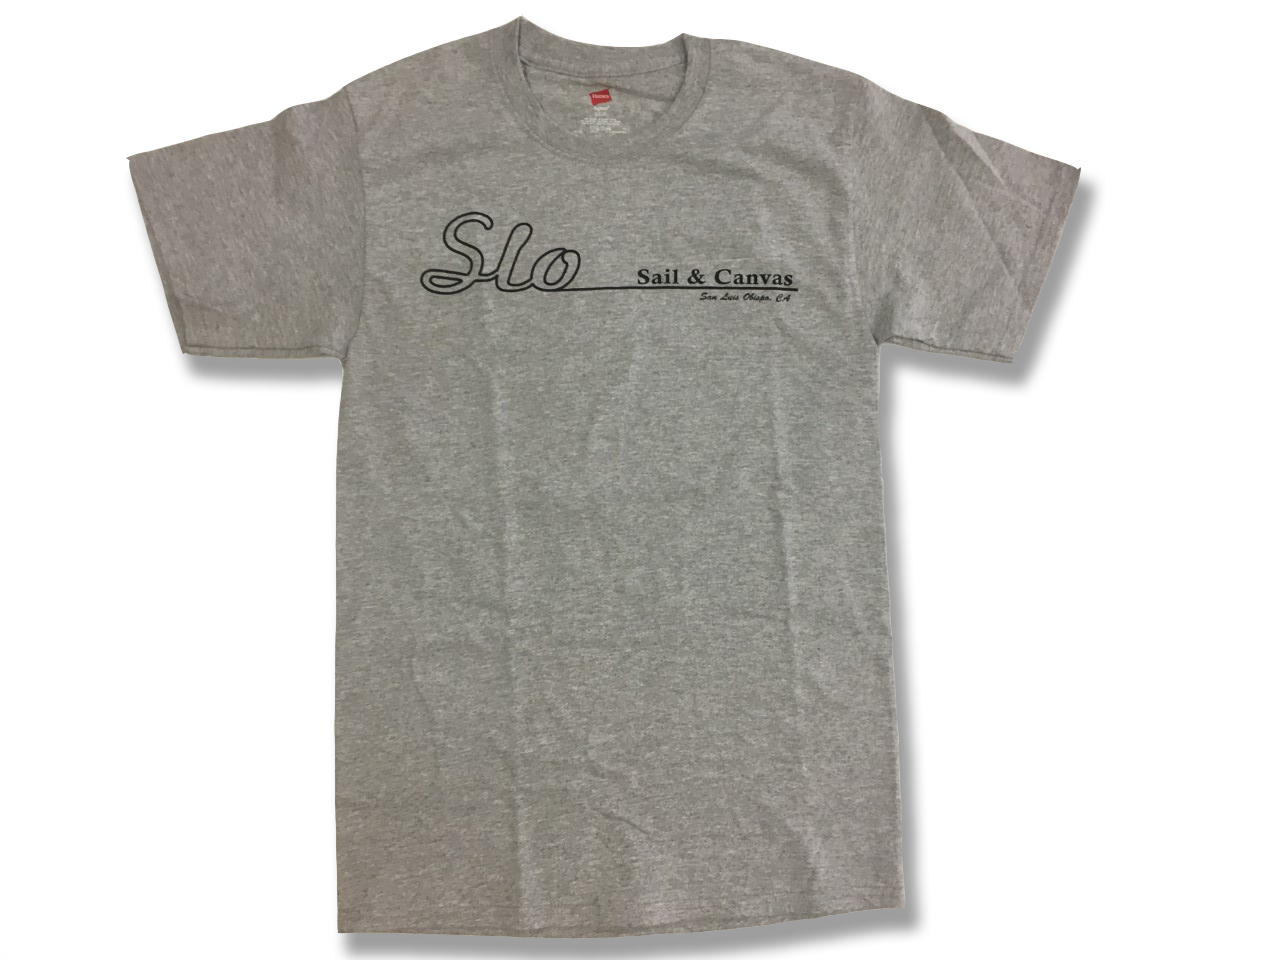 SLO Sail and Canvas T Shirt. Great to give to a sailor as a gift - or treat yourself to a comfortable lightweight T shirt! Shown in Premium Heather. 